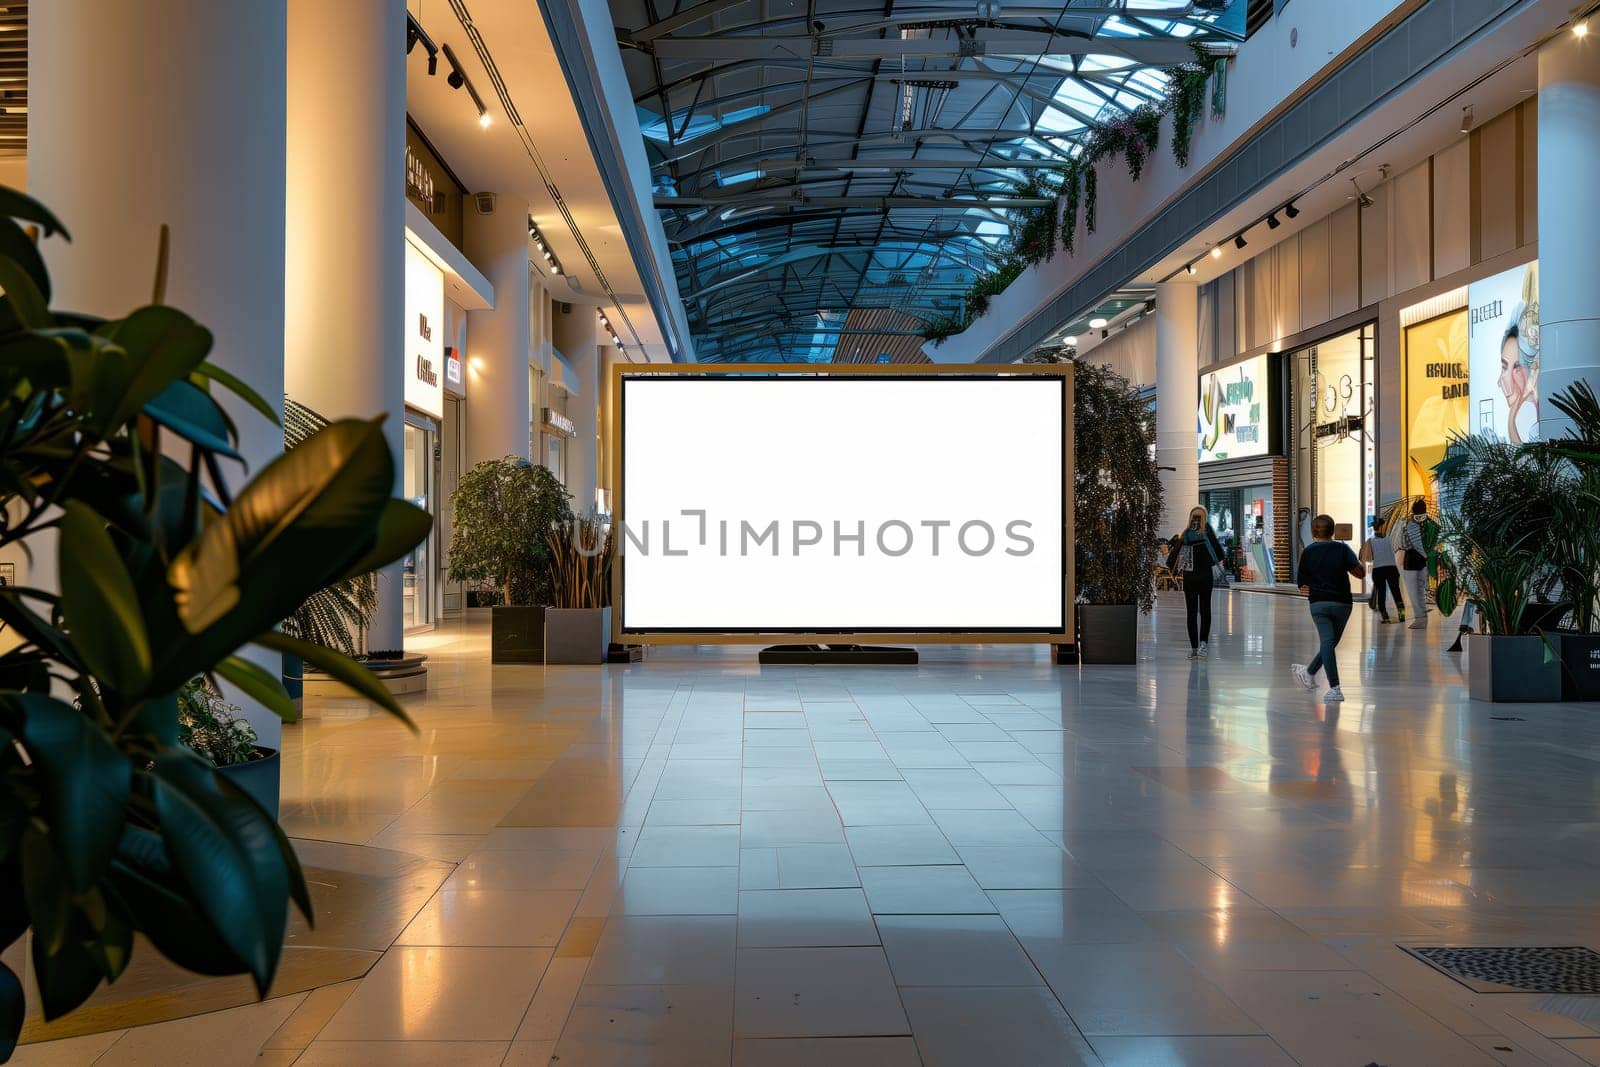 A massive white billboard stands in the malls center by richwolf